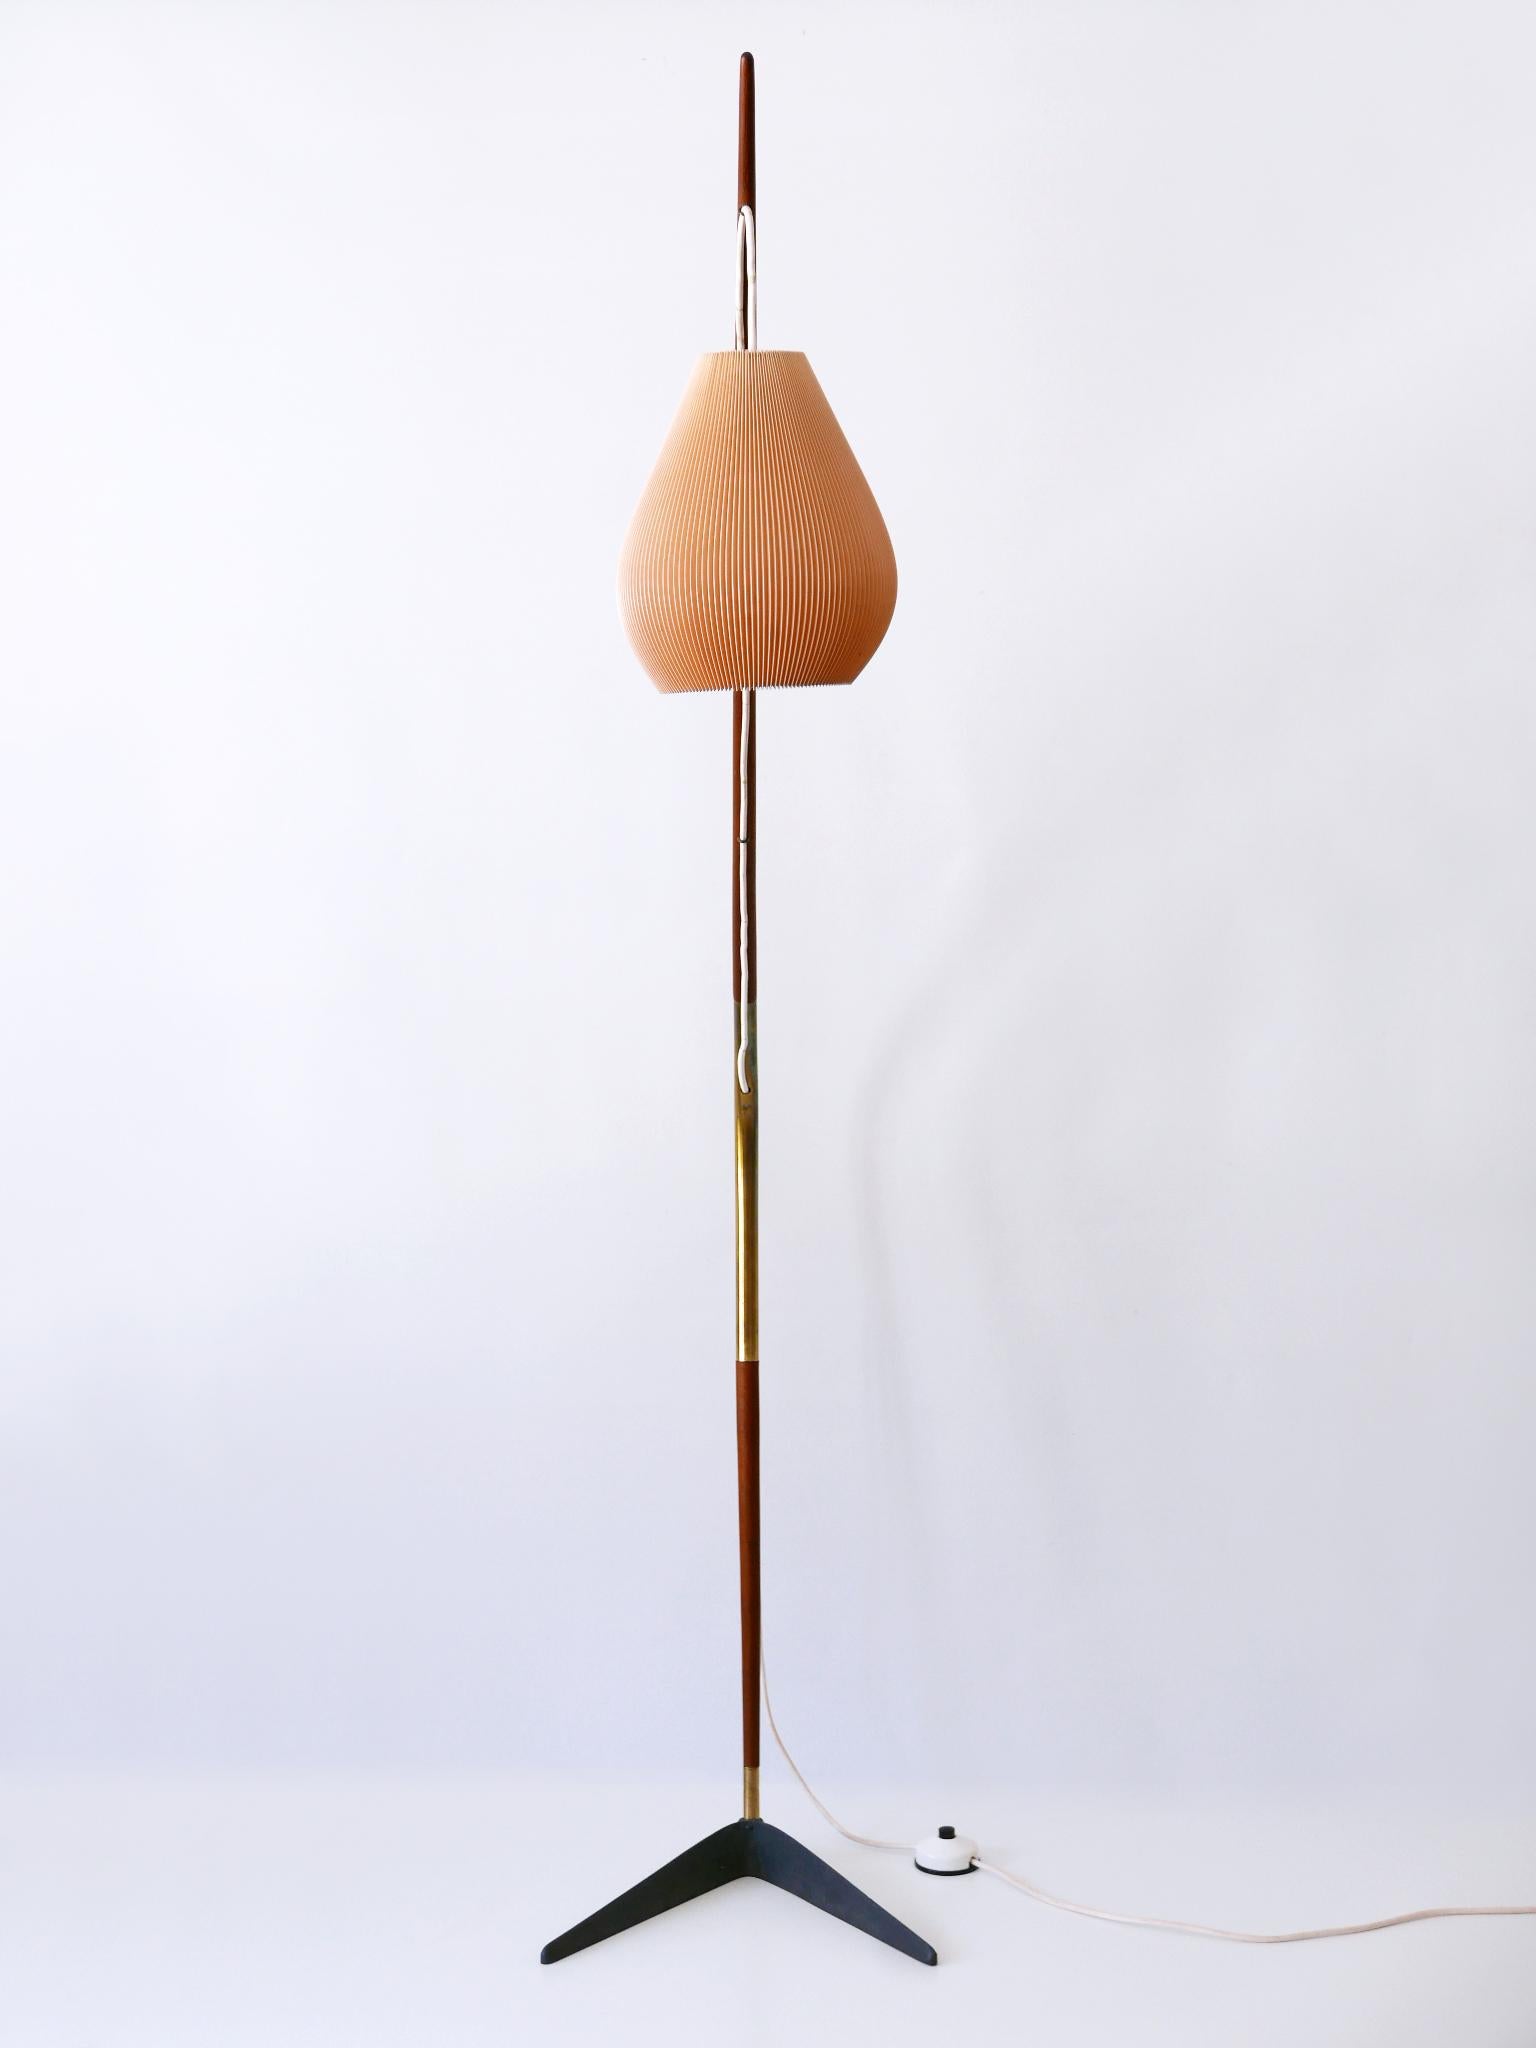 Cast Exceptional 'Fishing Pole' Floor Lamp by Svend Aage Holm Sørensen Denmark 1950s For Sale